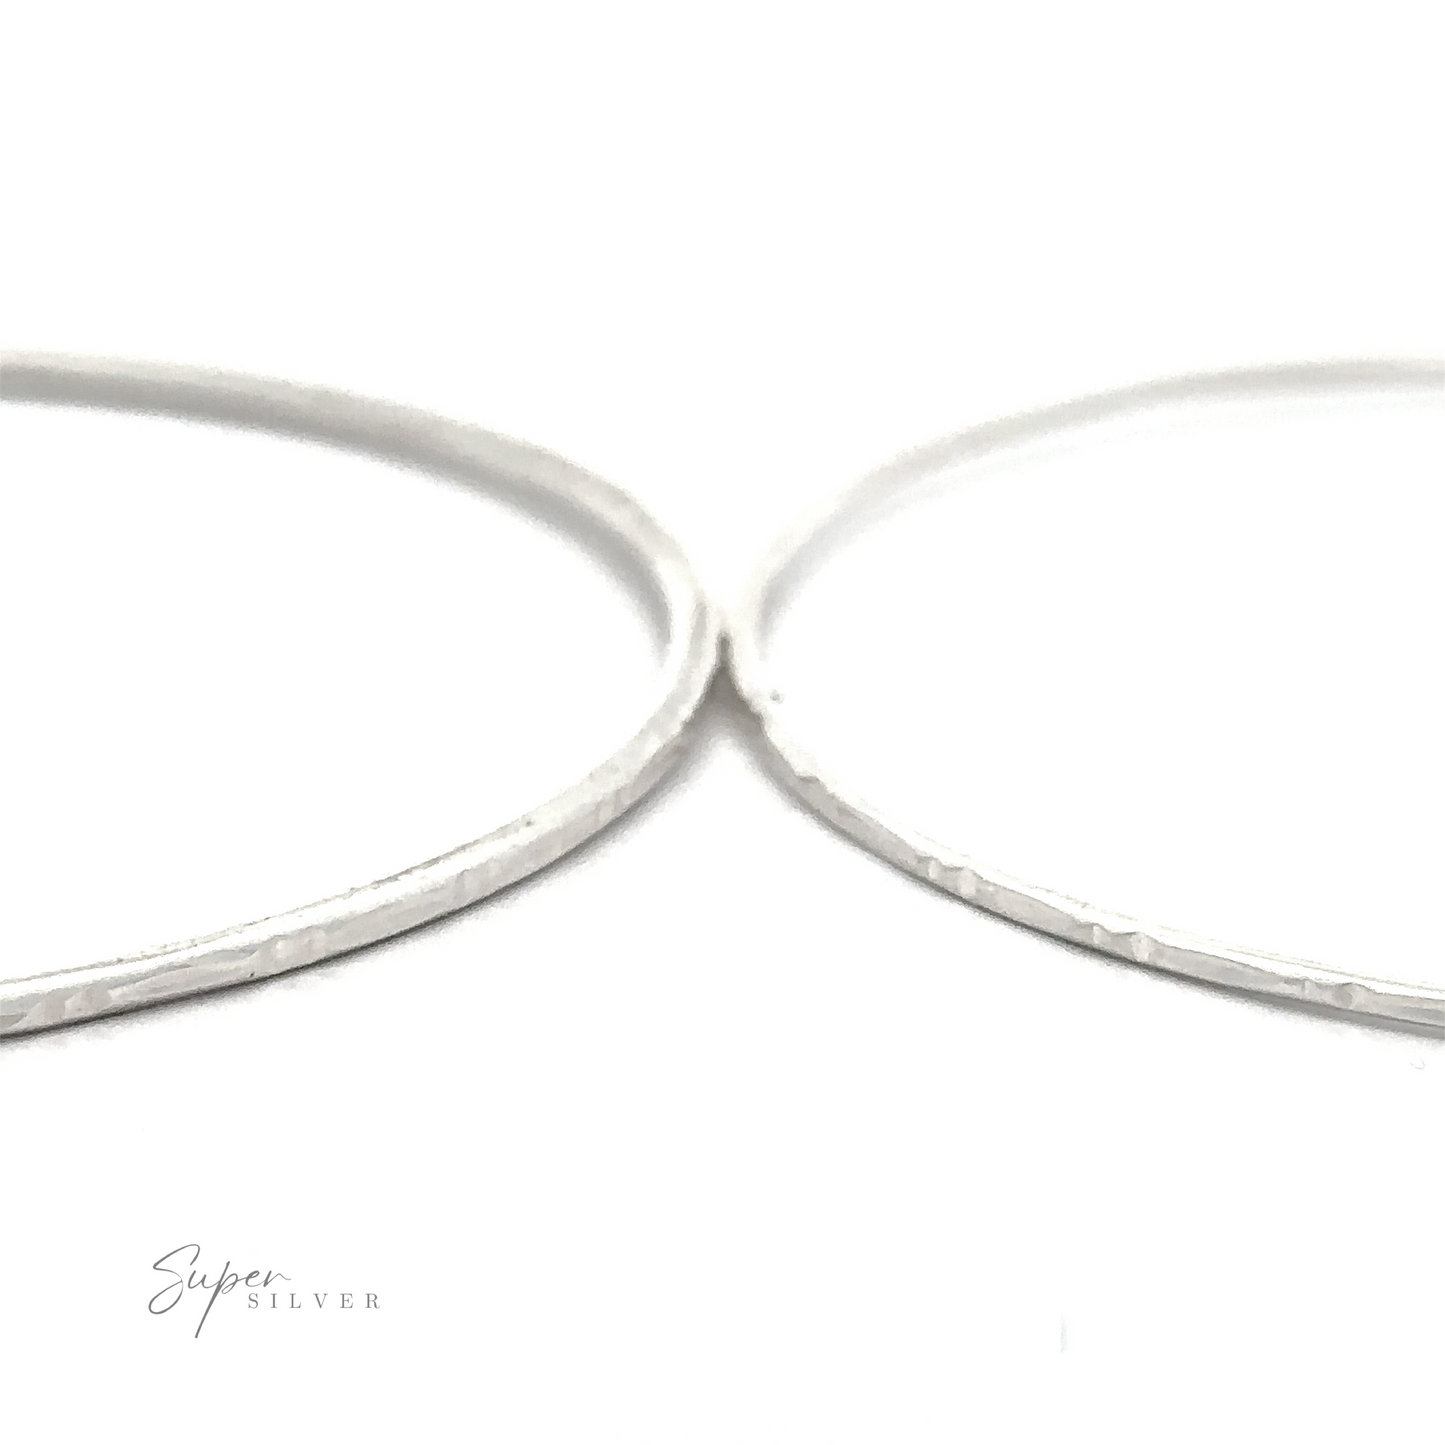 
                  
                    Close-up of two thin, Sparkling Faceted Bangle Bracelets with a textured surface. The background is white, and the text "Super Silver" appears in the lower left corner.
                  
                